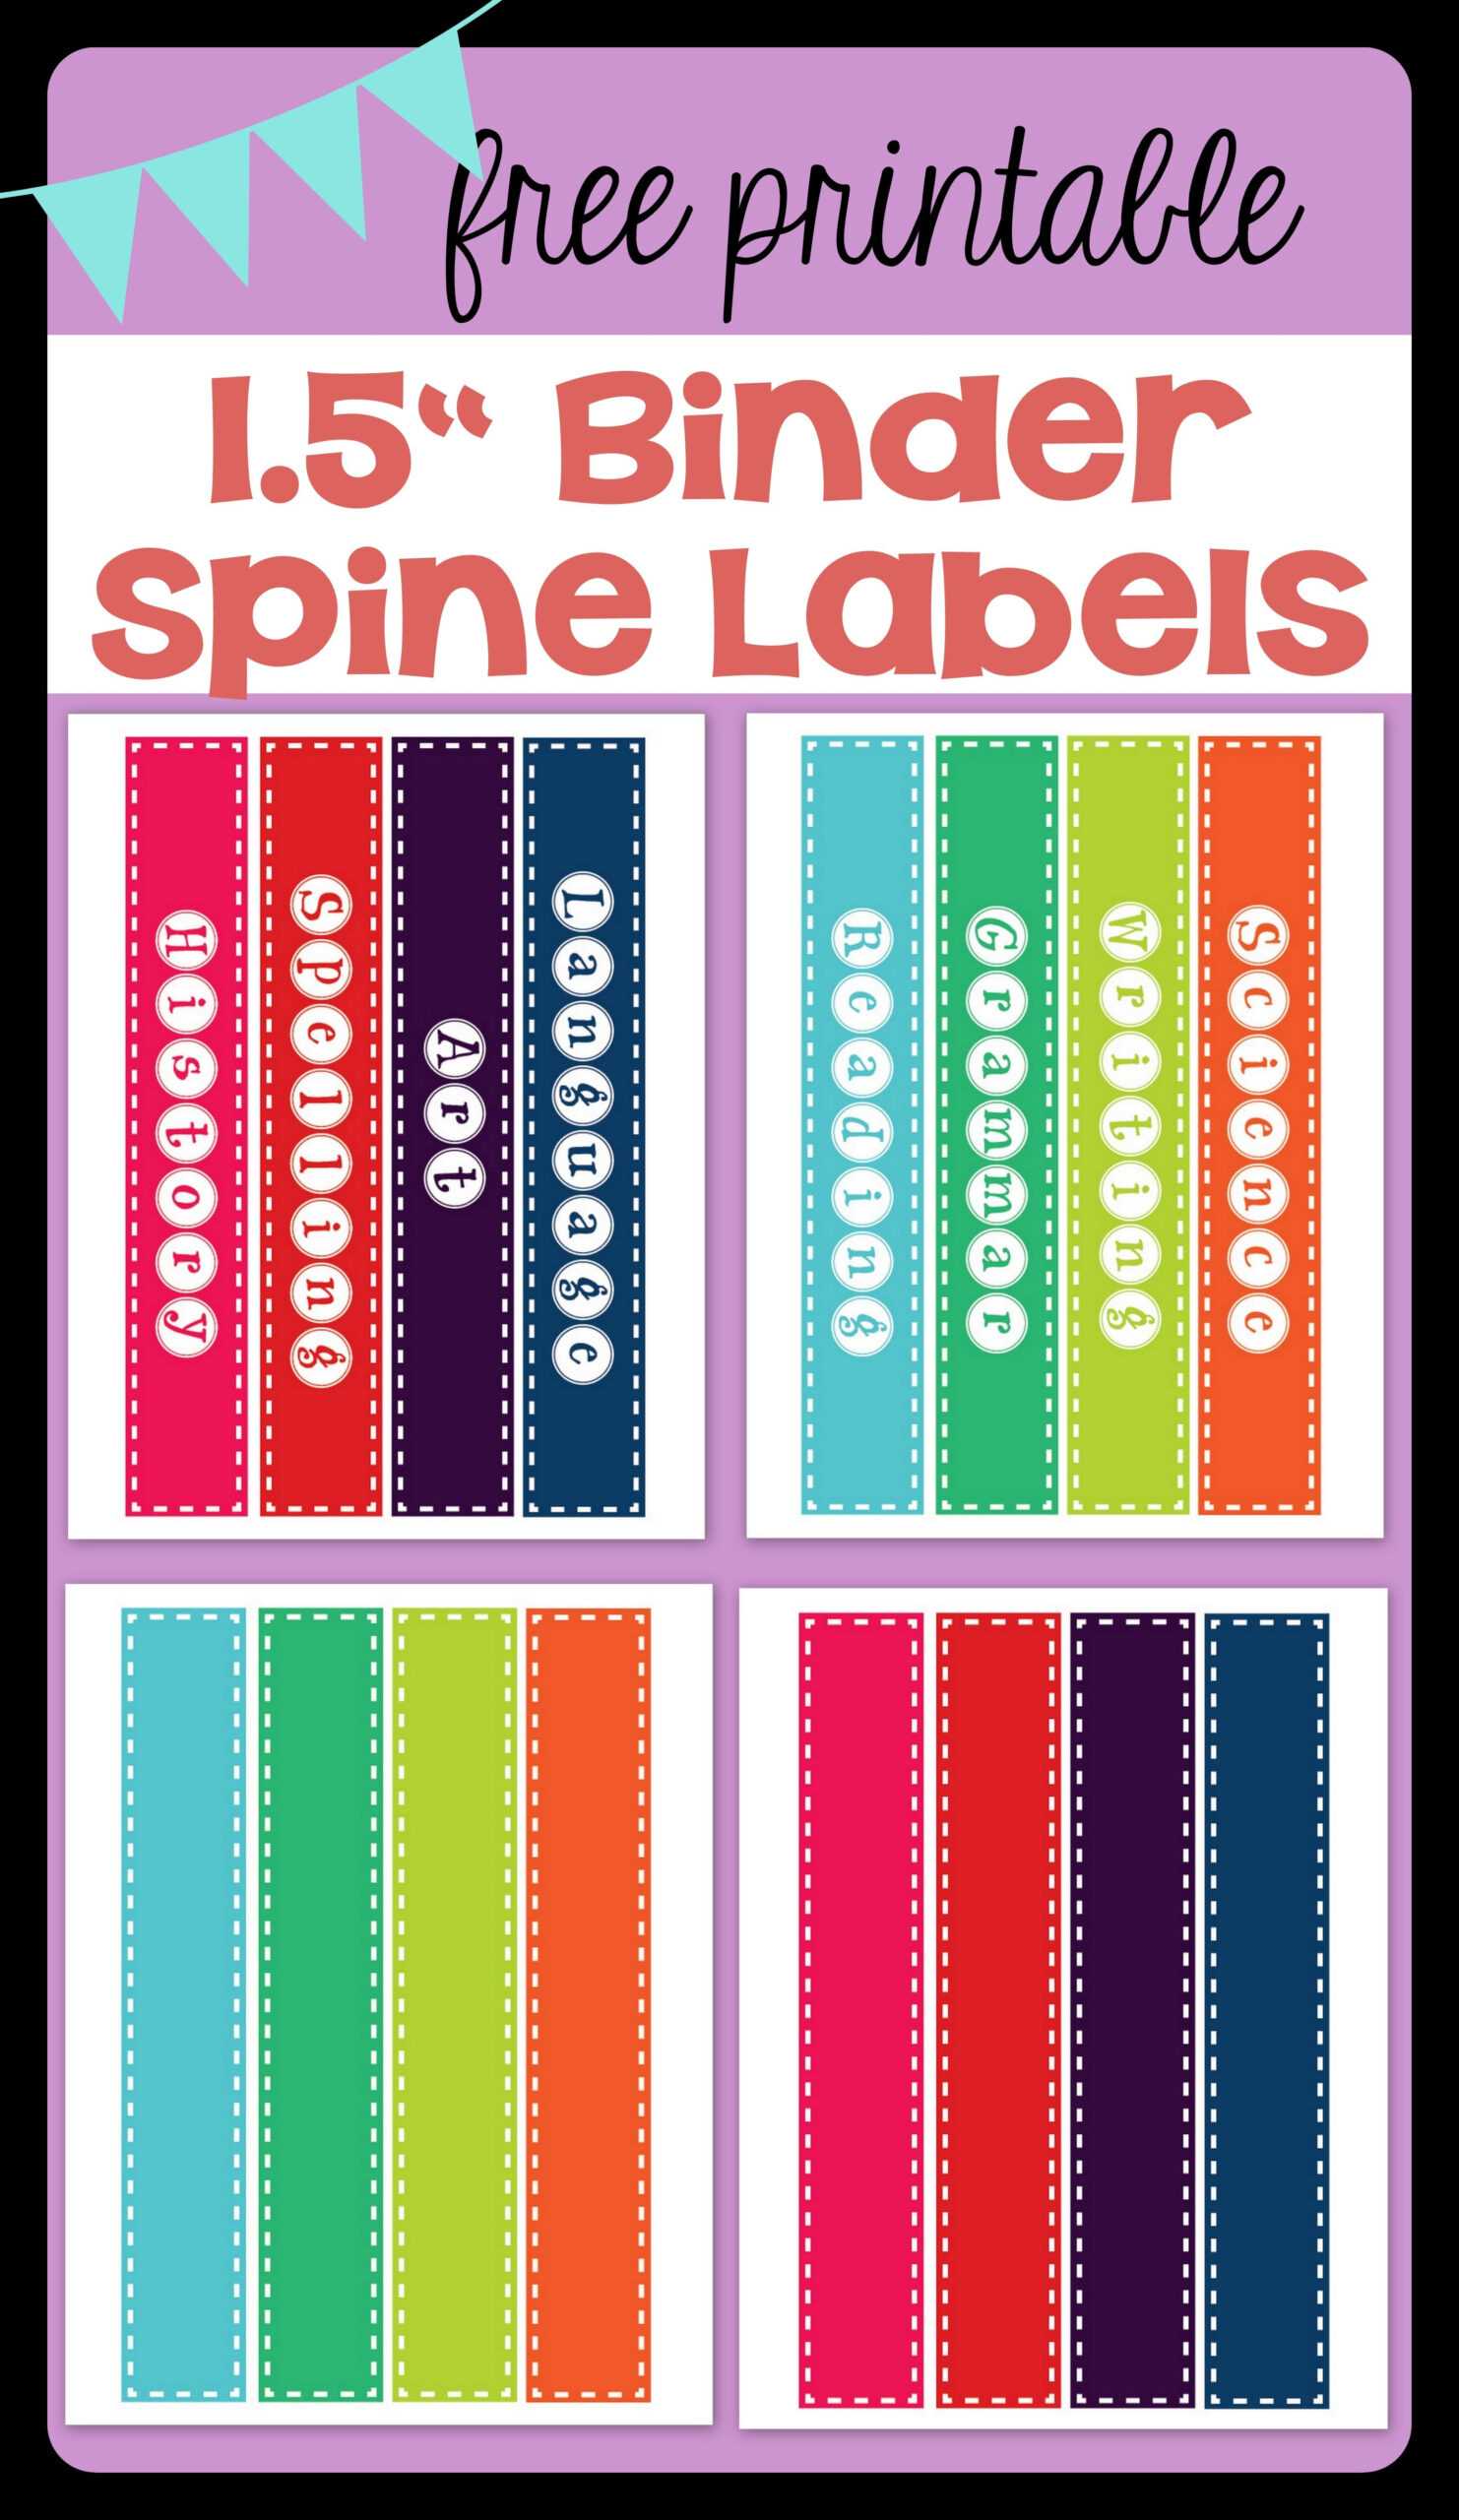 Free Printable 1.5" Binder Spine Labels For Basic School Pertaining To Binder Spine Template Word